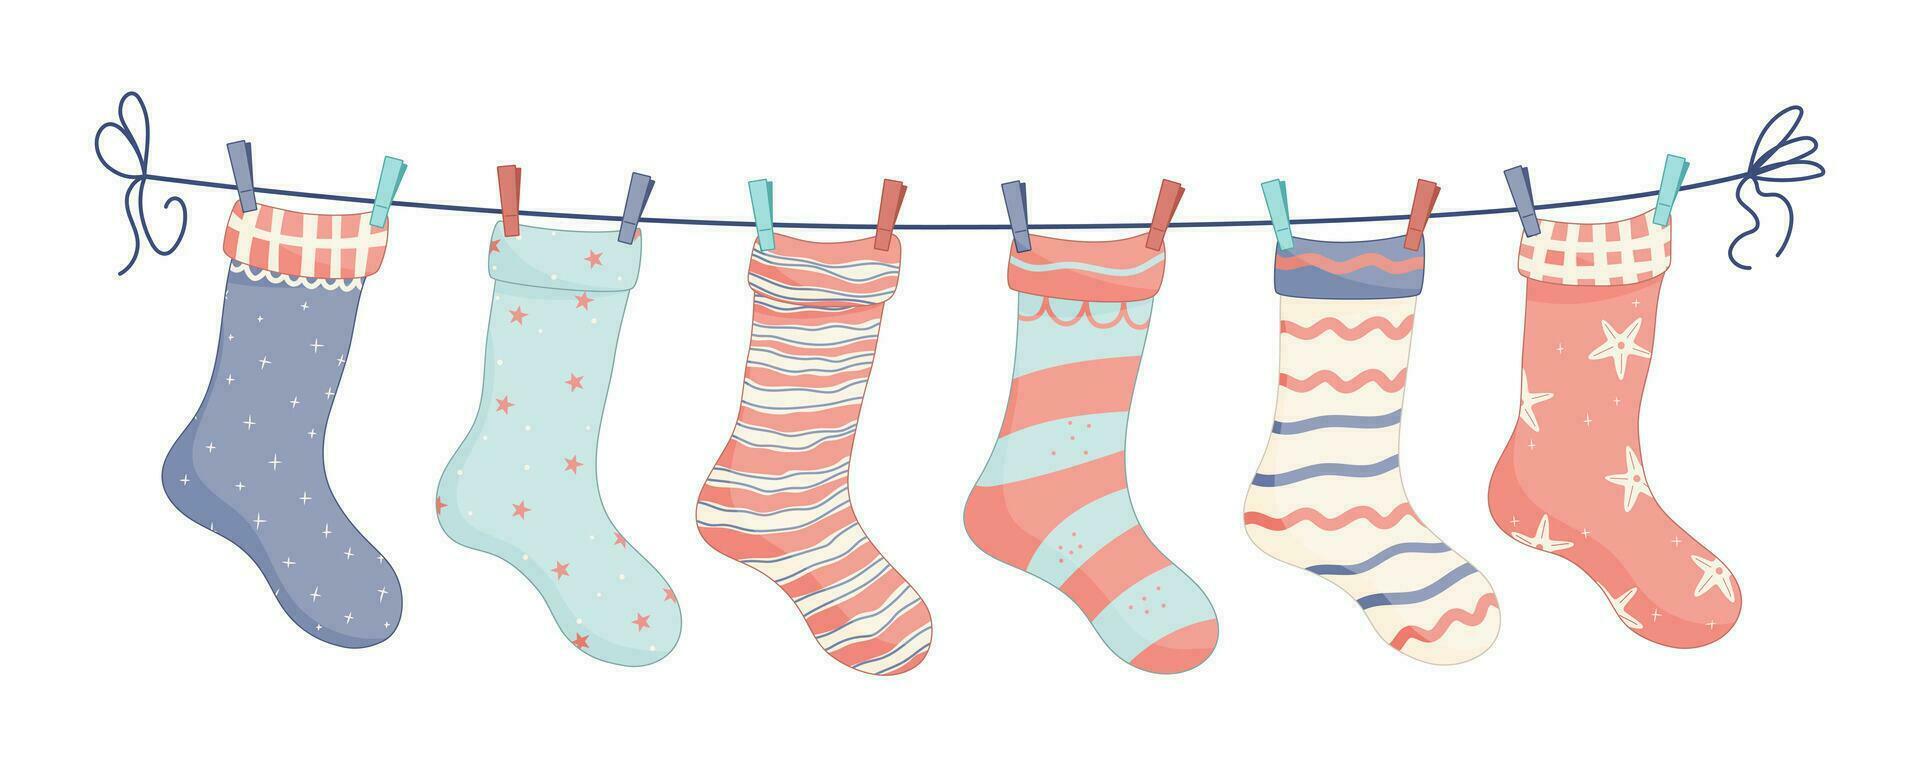 Socks with textures and patterns with colored clothespins. Vector illustration